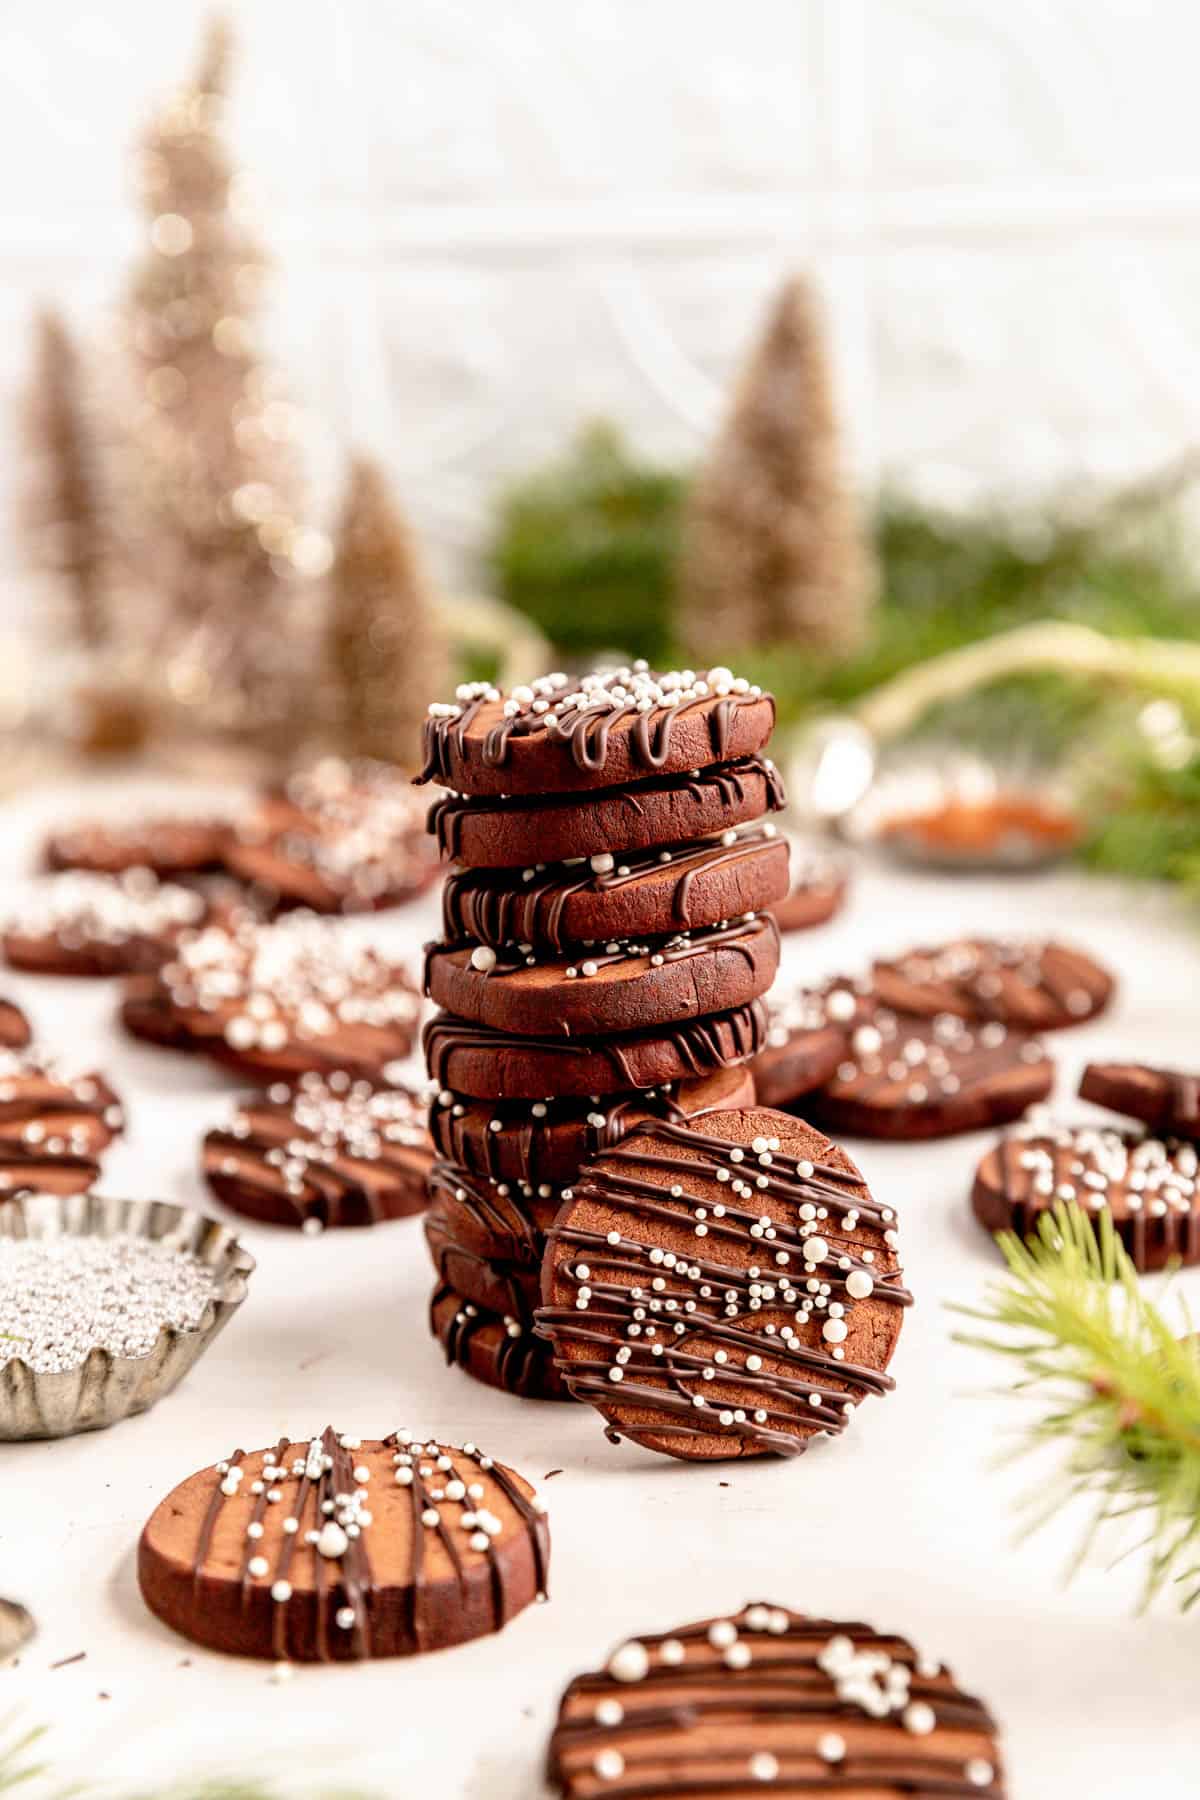 a stack of decorated chocolate butter cookies with on leaning upright on the stack with evergreen branches